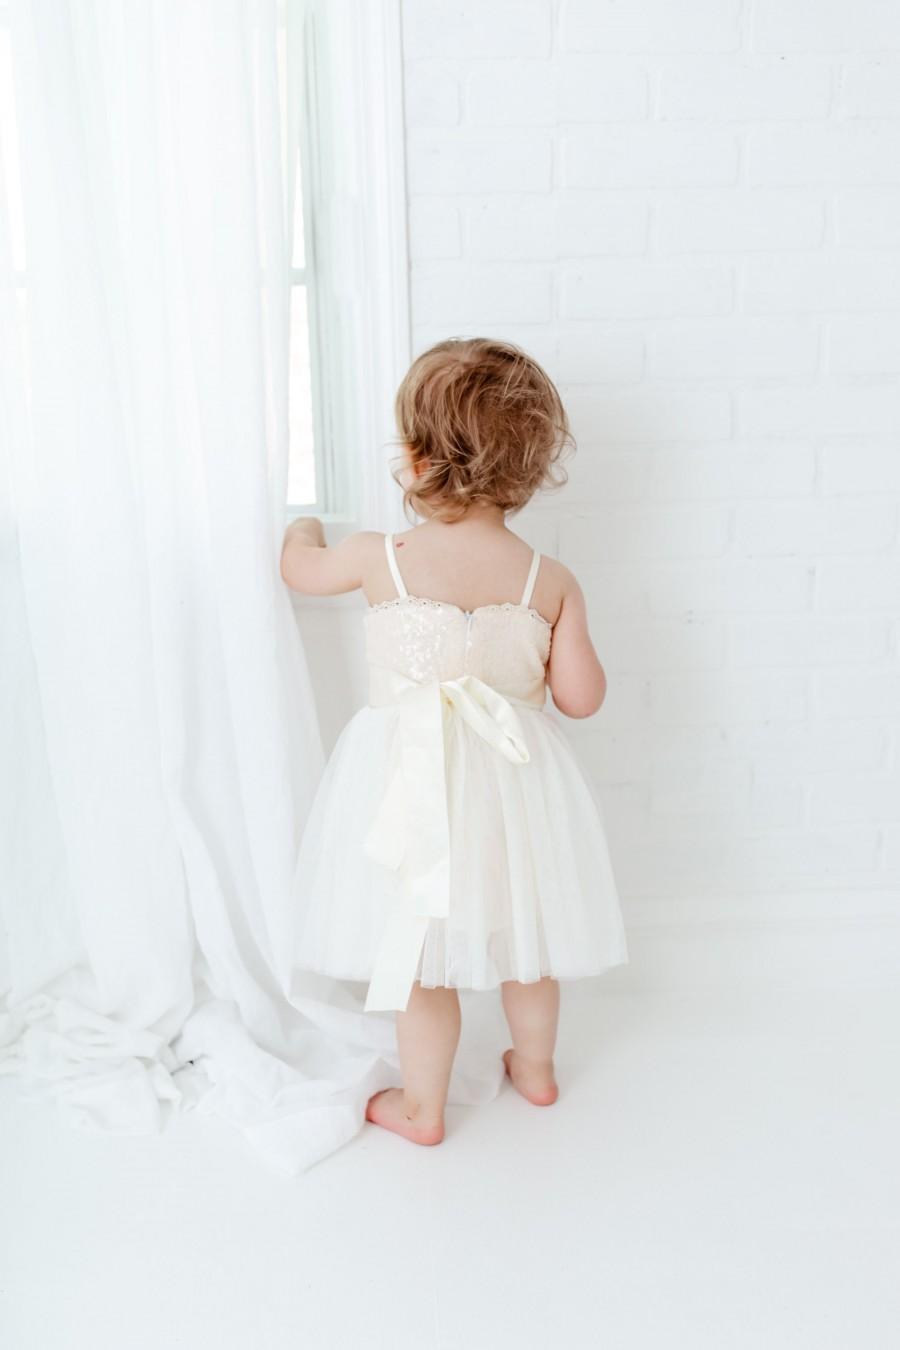 Mariage - Rustic Tulle Flower Girl Dress, Romantic Sequin Dress, Ivory Cream Wedding, Will You Be My Flower Girl Dress